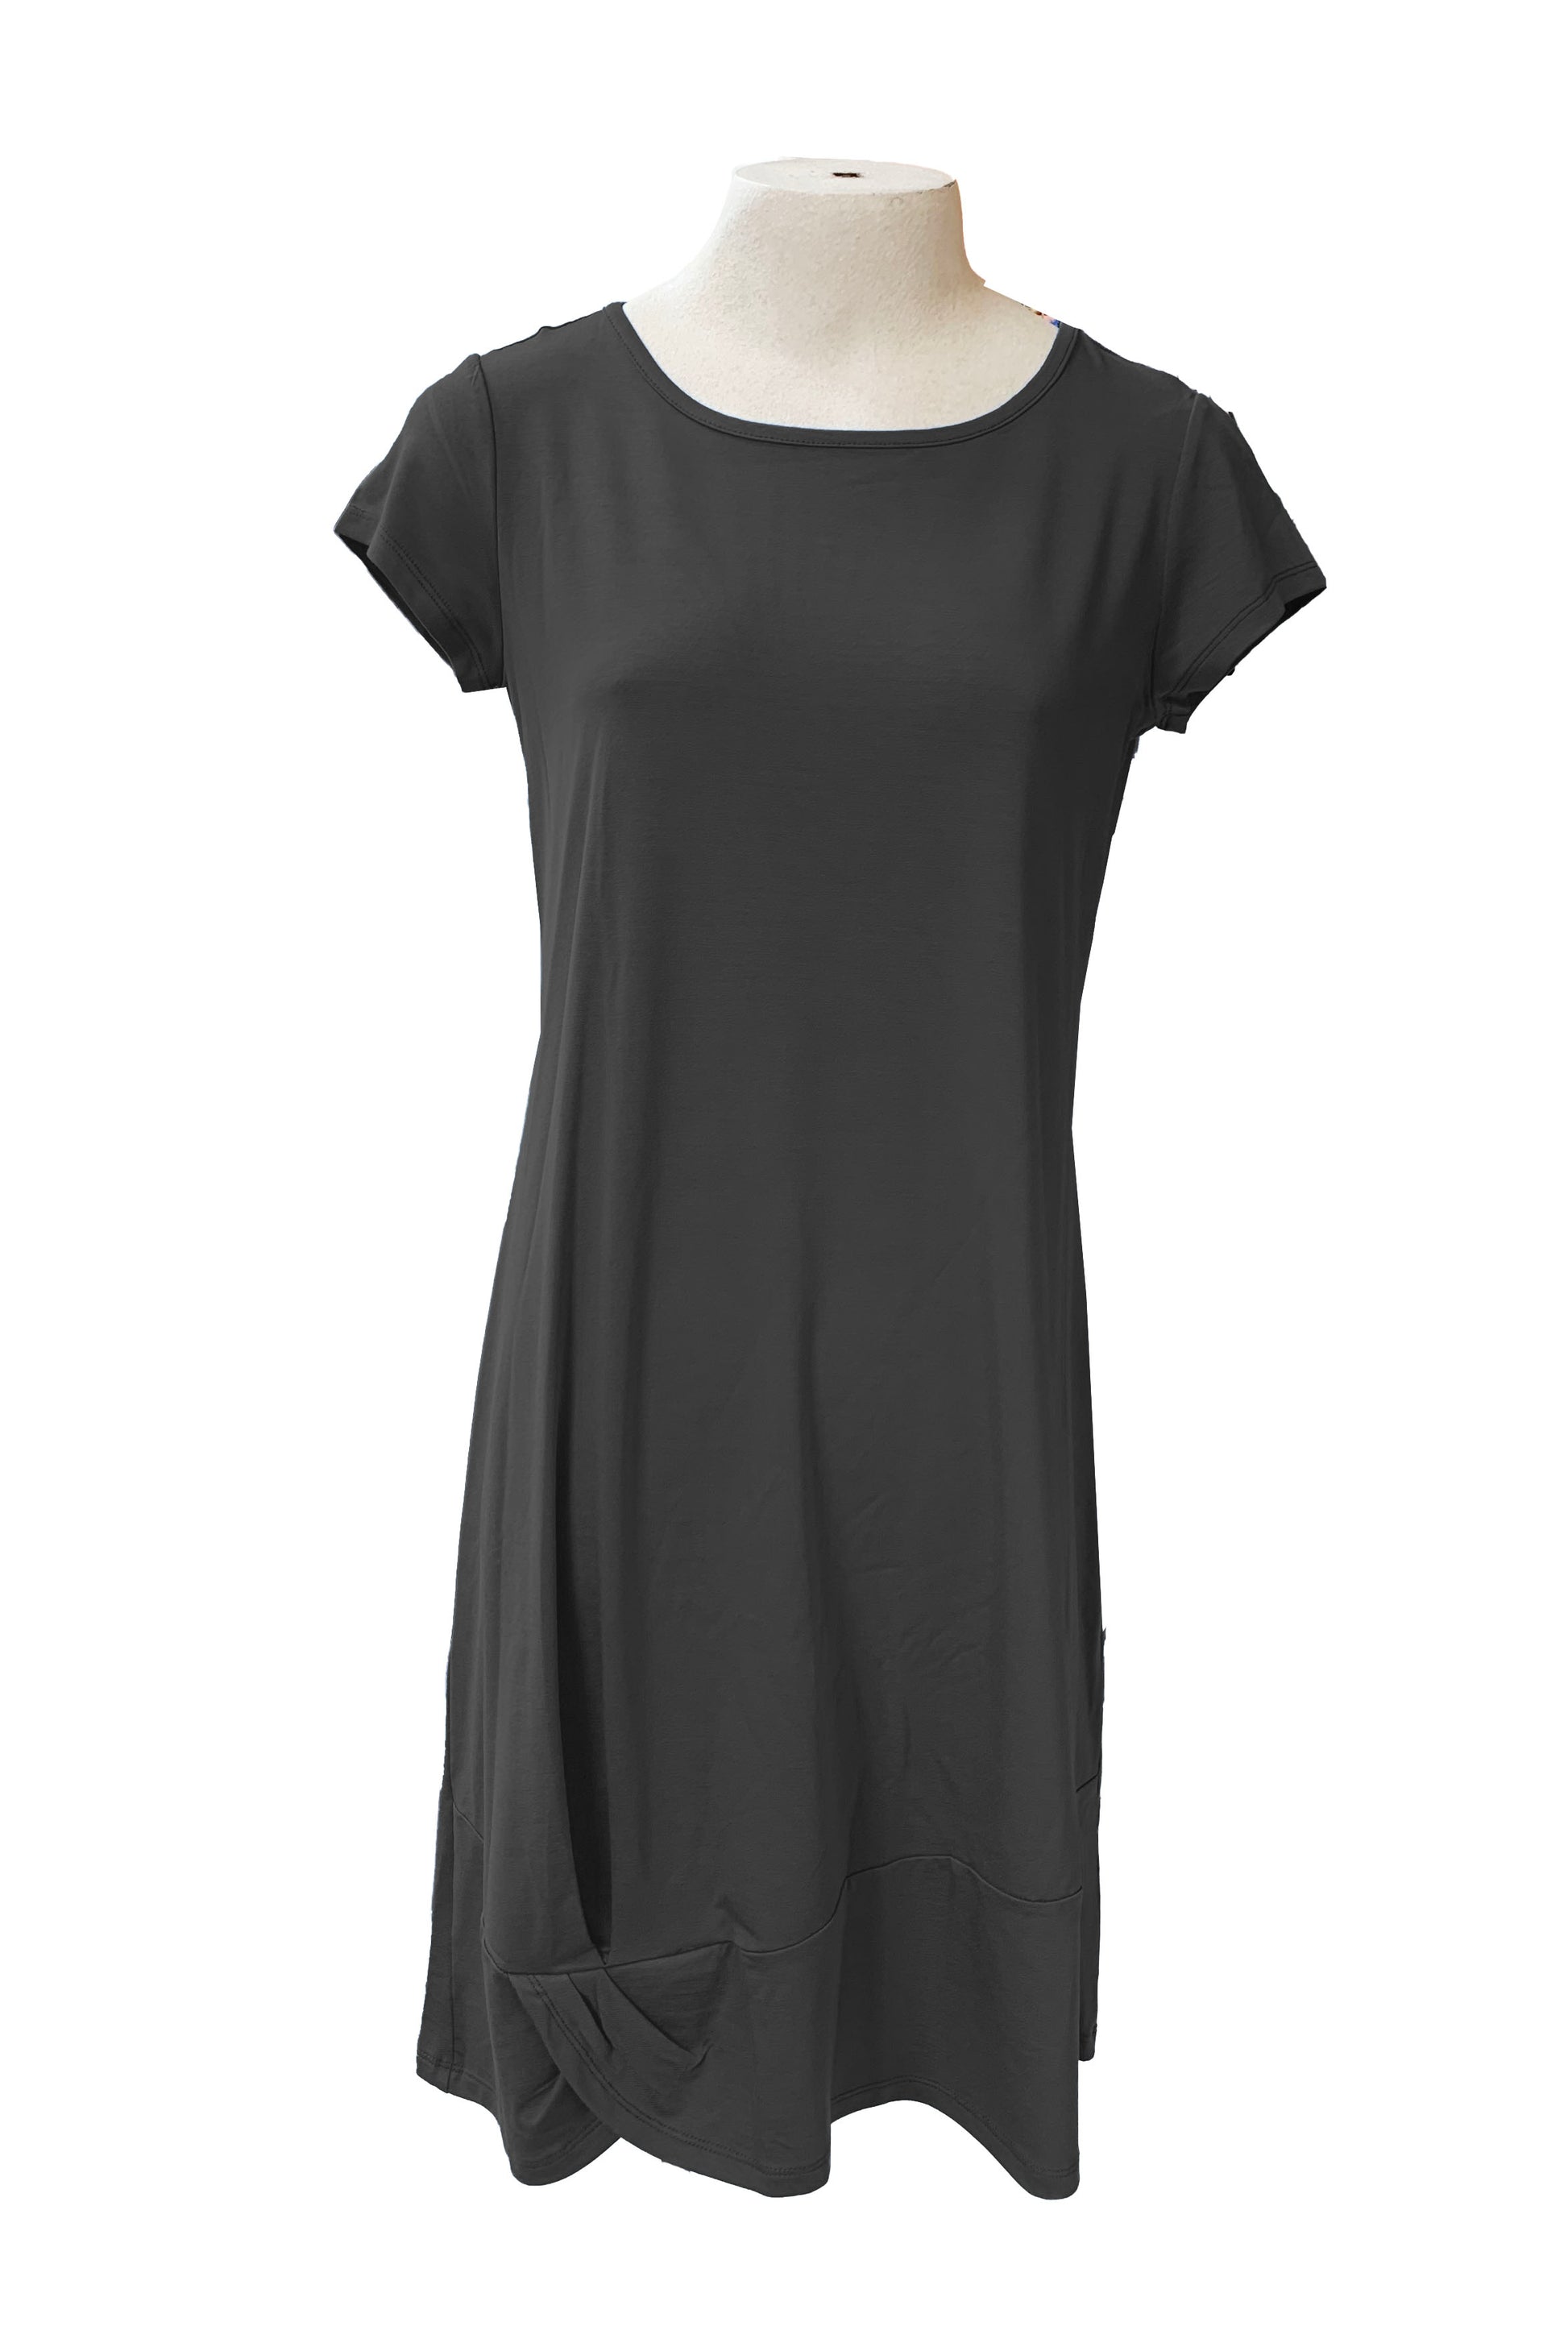 The Catreena Dress in Black by Pure Essence is shown on a mannequin against a white background 